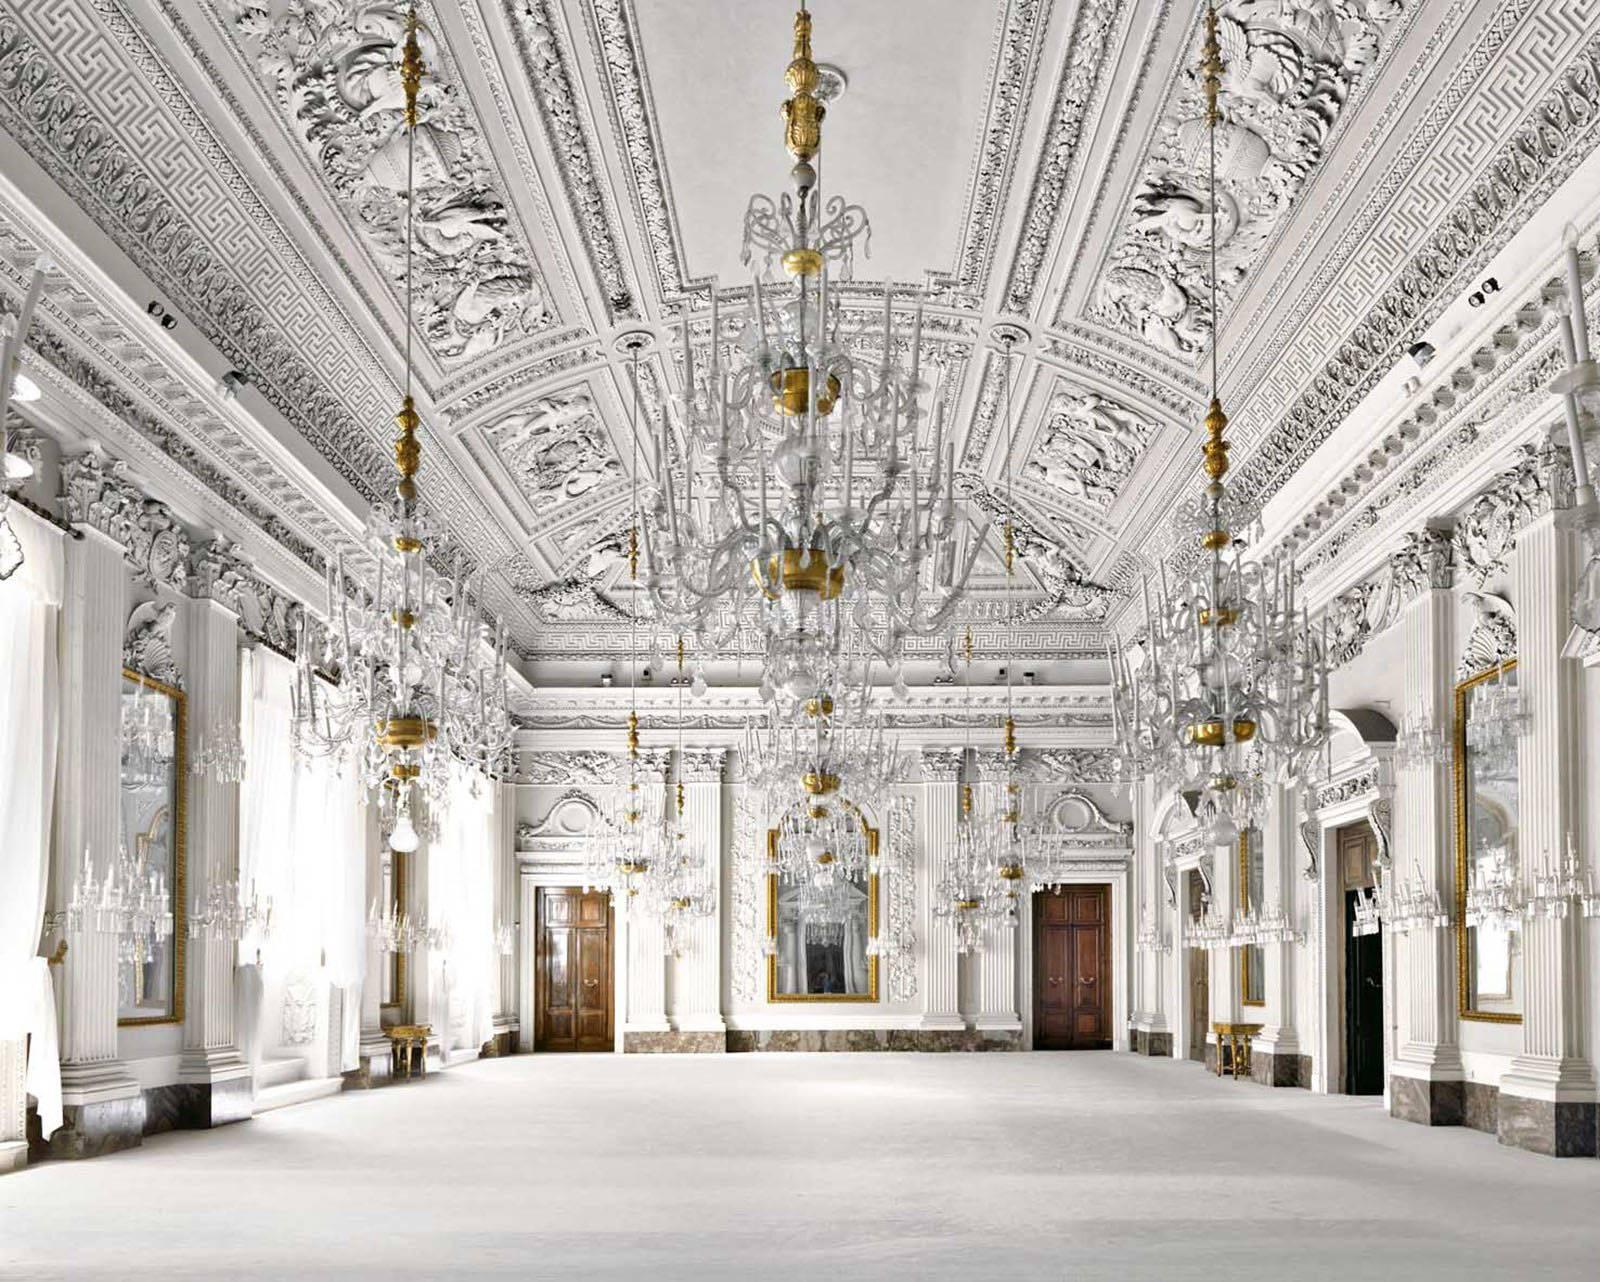 Palazzo Pitti, Sala Bianca, Firenze, 2008
Chromogenic print
120 x 150 cm
Edition of 5

Italian, b. 1954, Florence, Italy, based in Florence, Italy

Massimo Listri travels his native Italy and the world with his camera, photographing grand interior